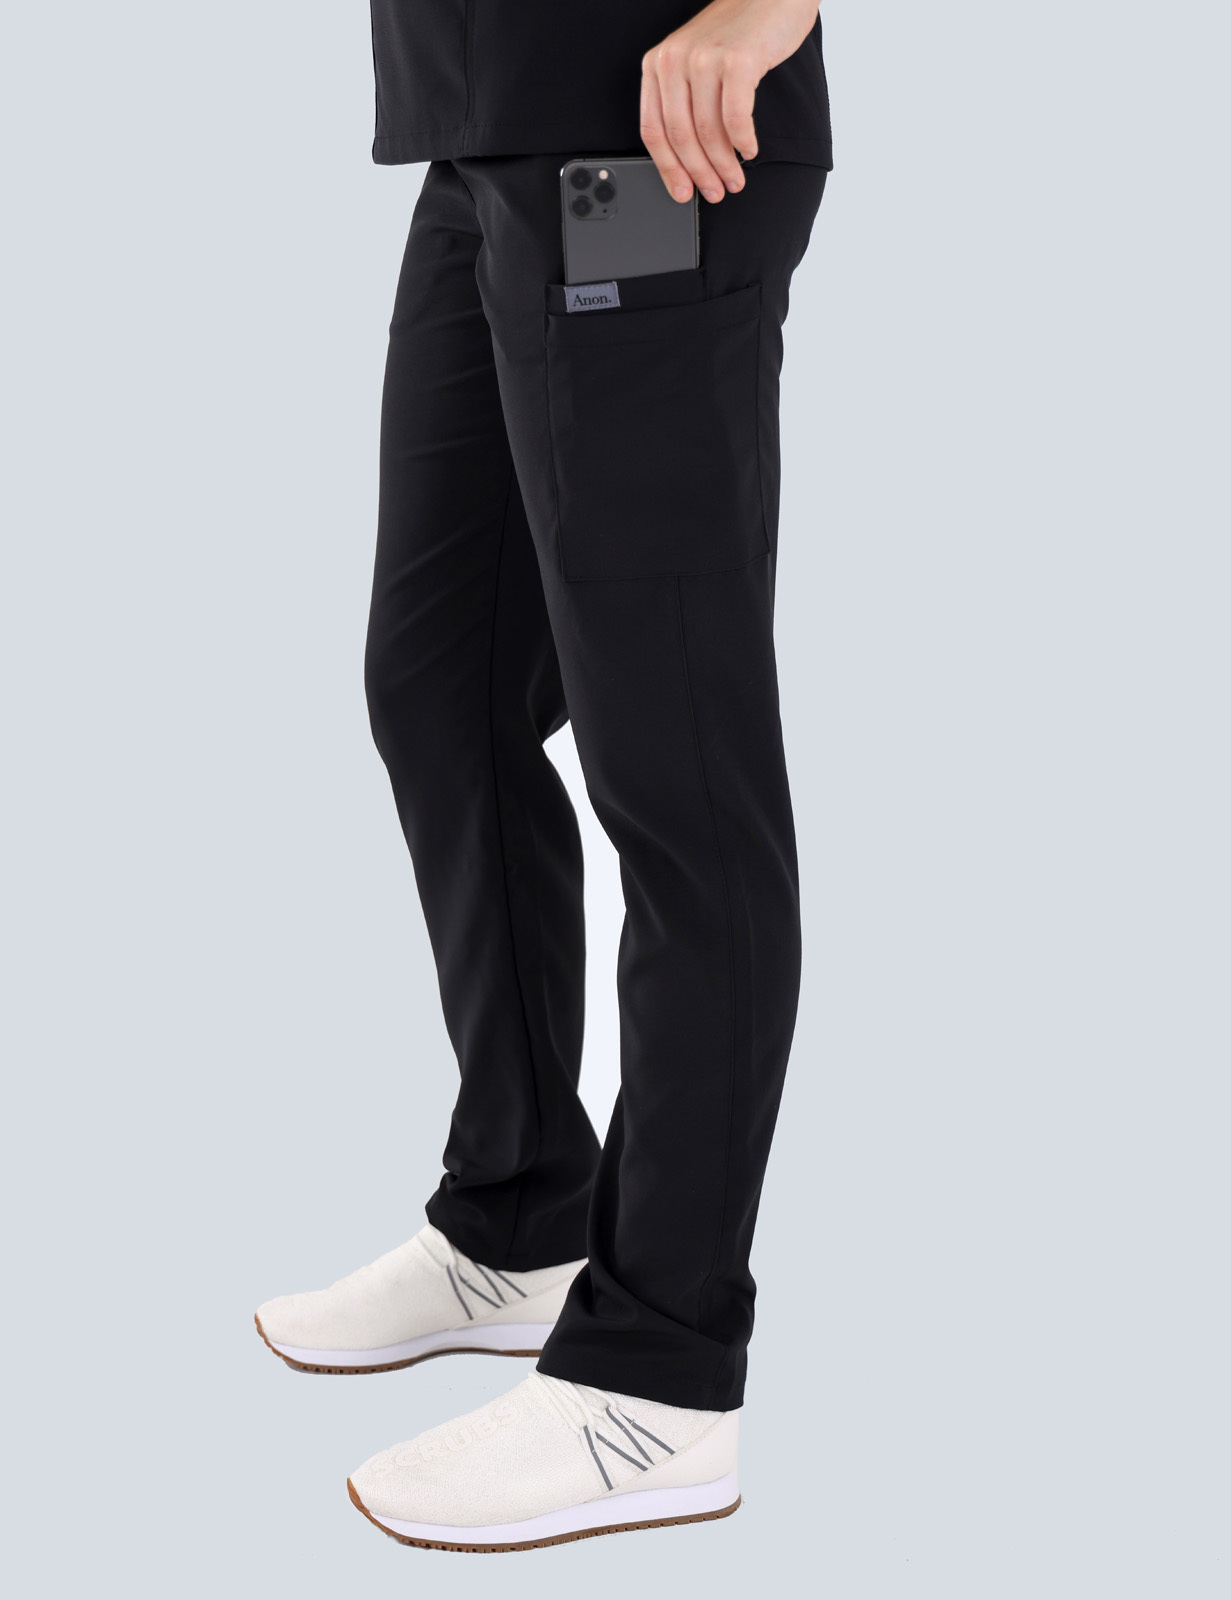 Anon Women's Scrub Pants (Whisper Collection) Poly/Spandex - Midnight Blue